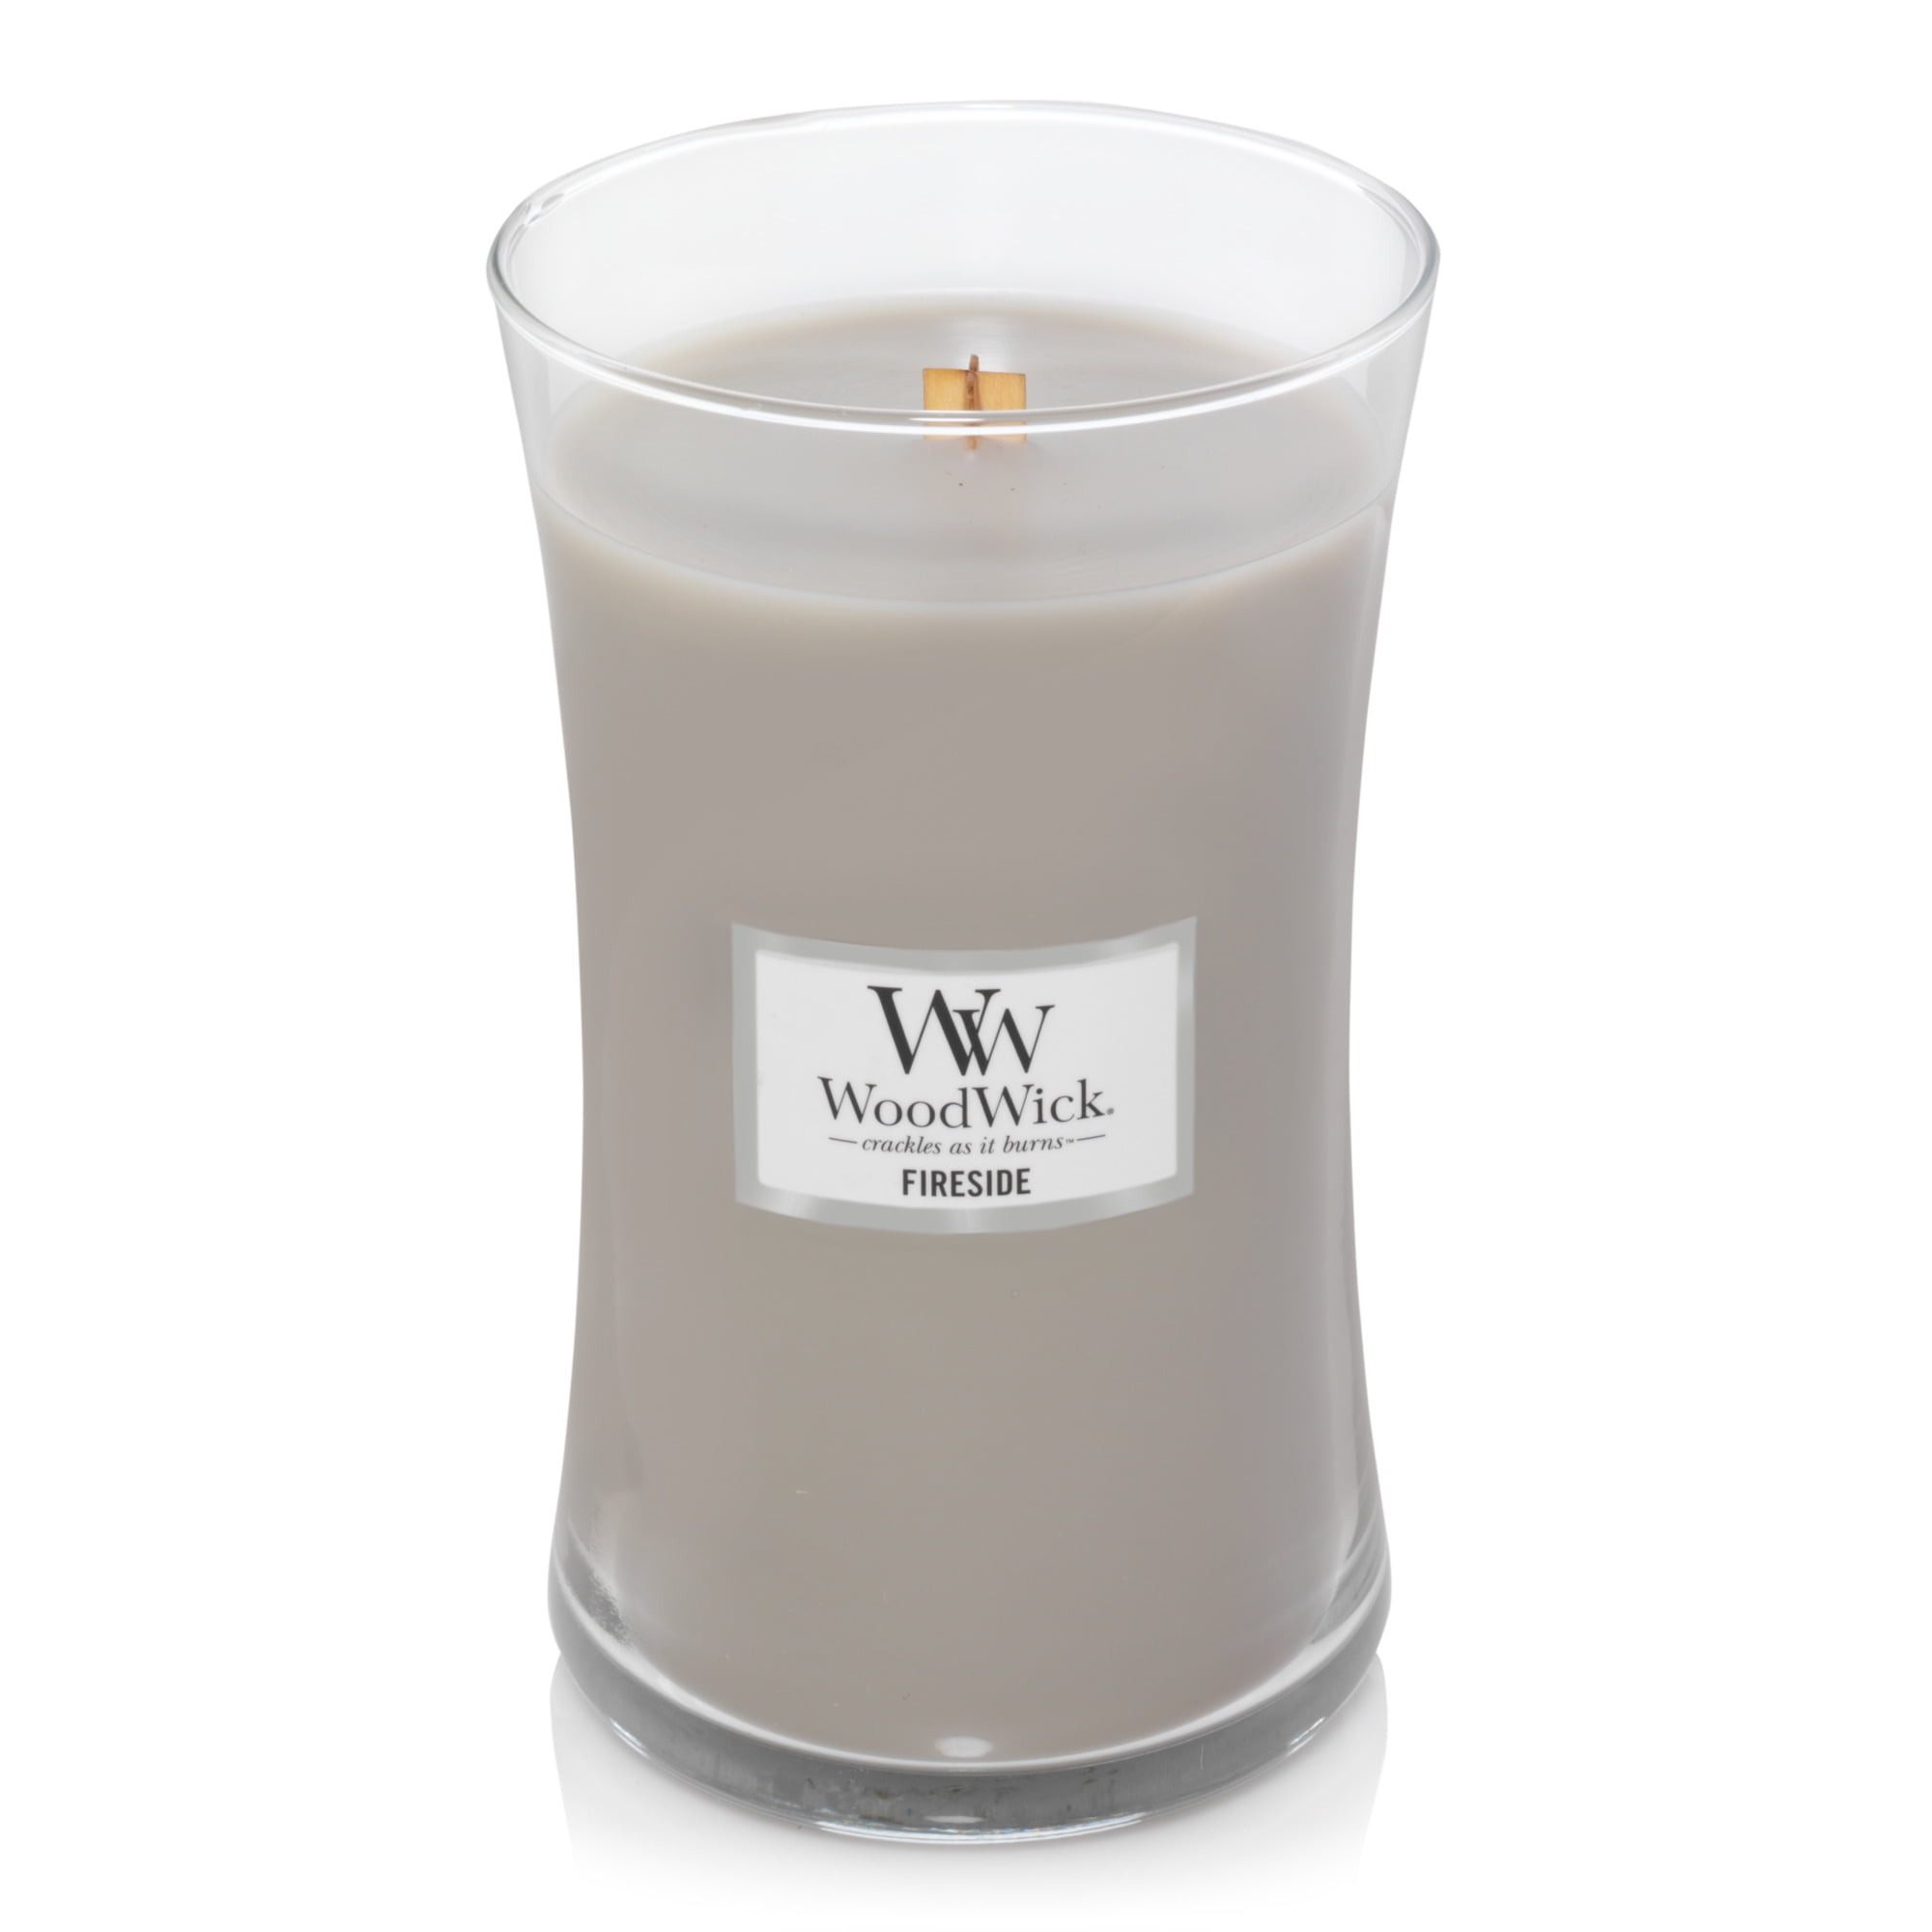 Have you guys tried Woodwick Candle? I'm obsessed with their Humidor! :  r/goosecreekcandles